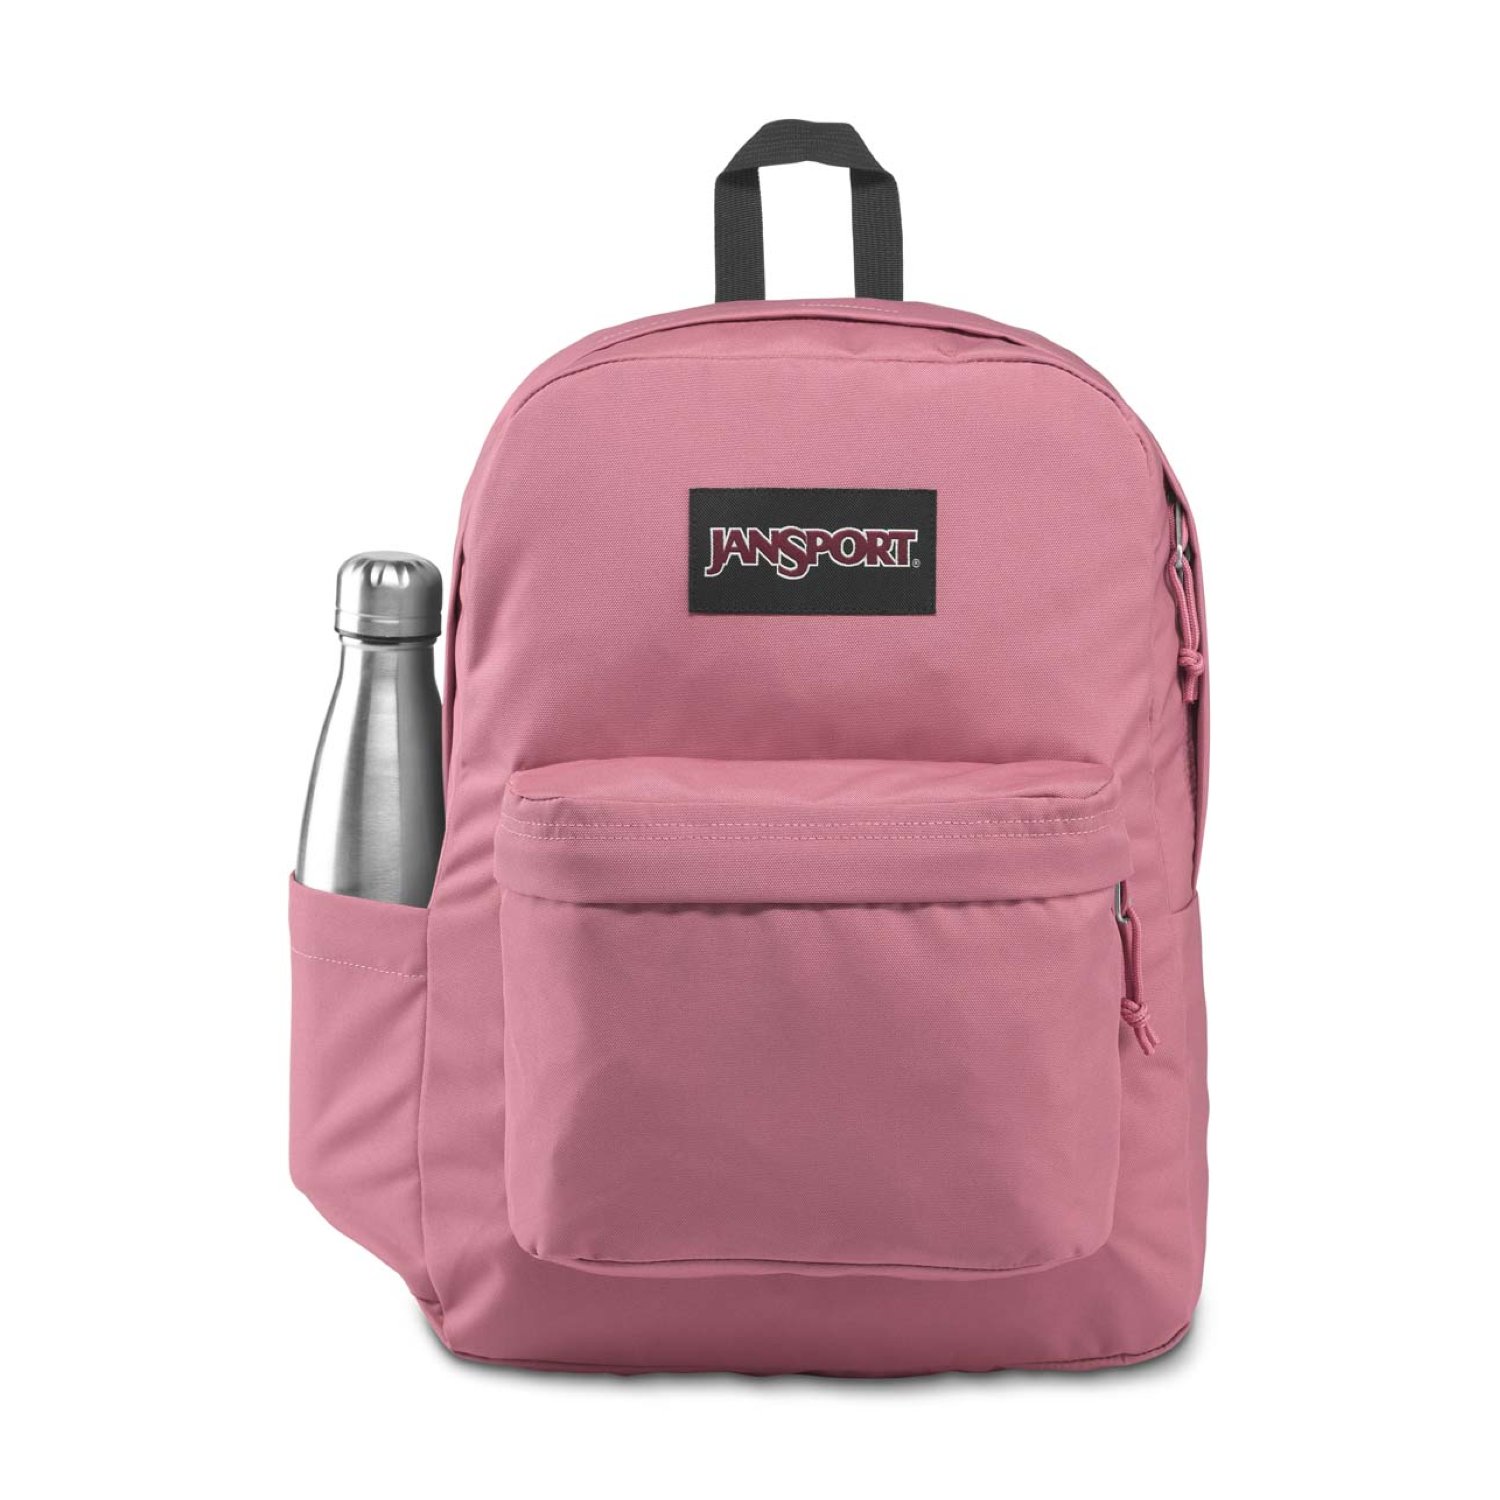 jansport bags outlet in singapore